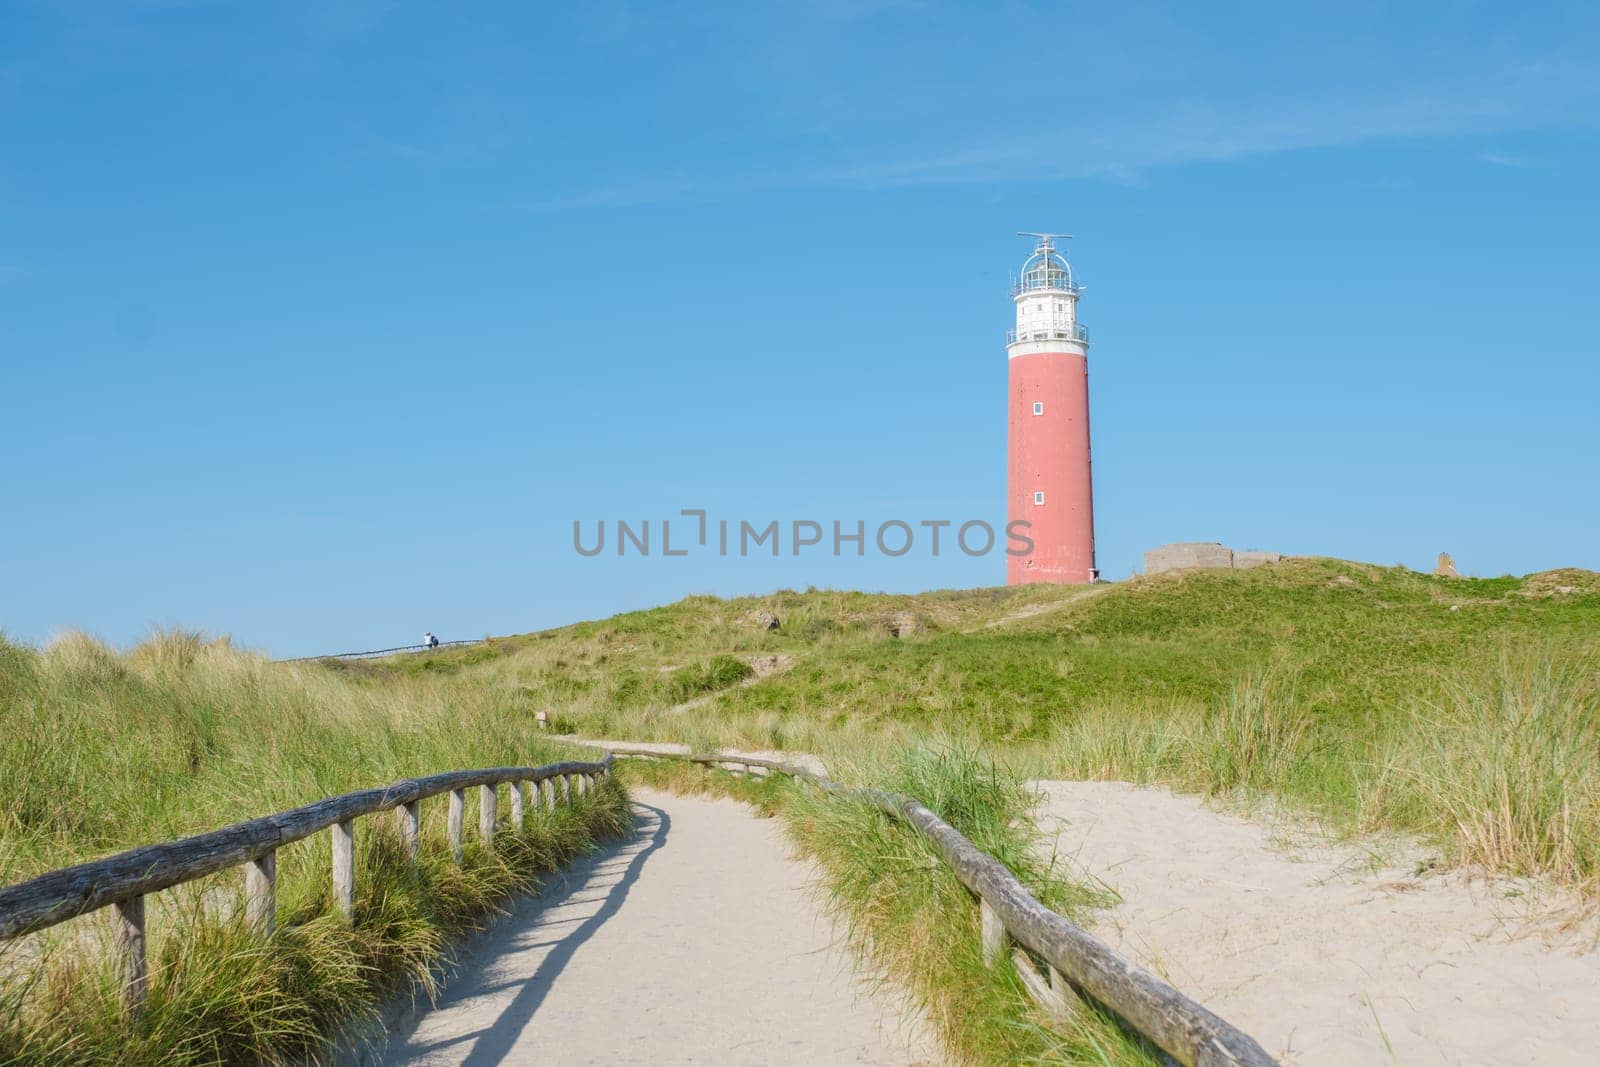 A winding path through the sandy dunes leads to a picturesque lighthouse standing tall against the horizon in Texel, Netherlands.